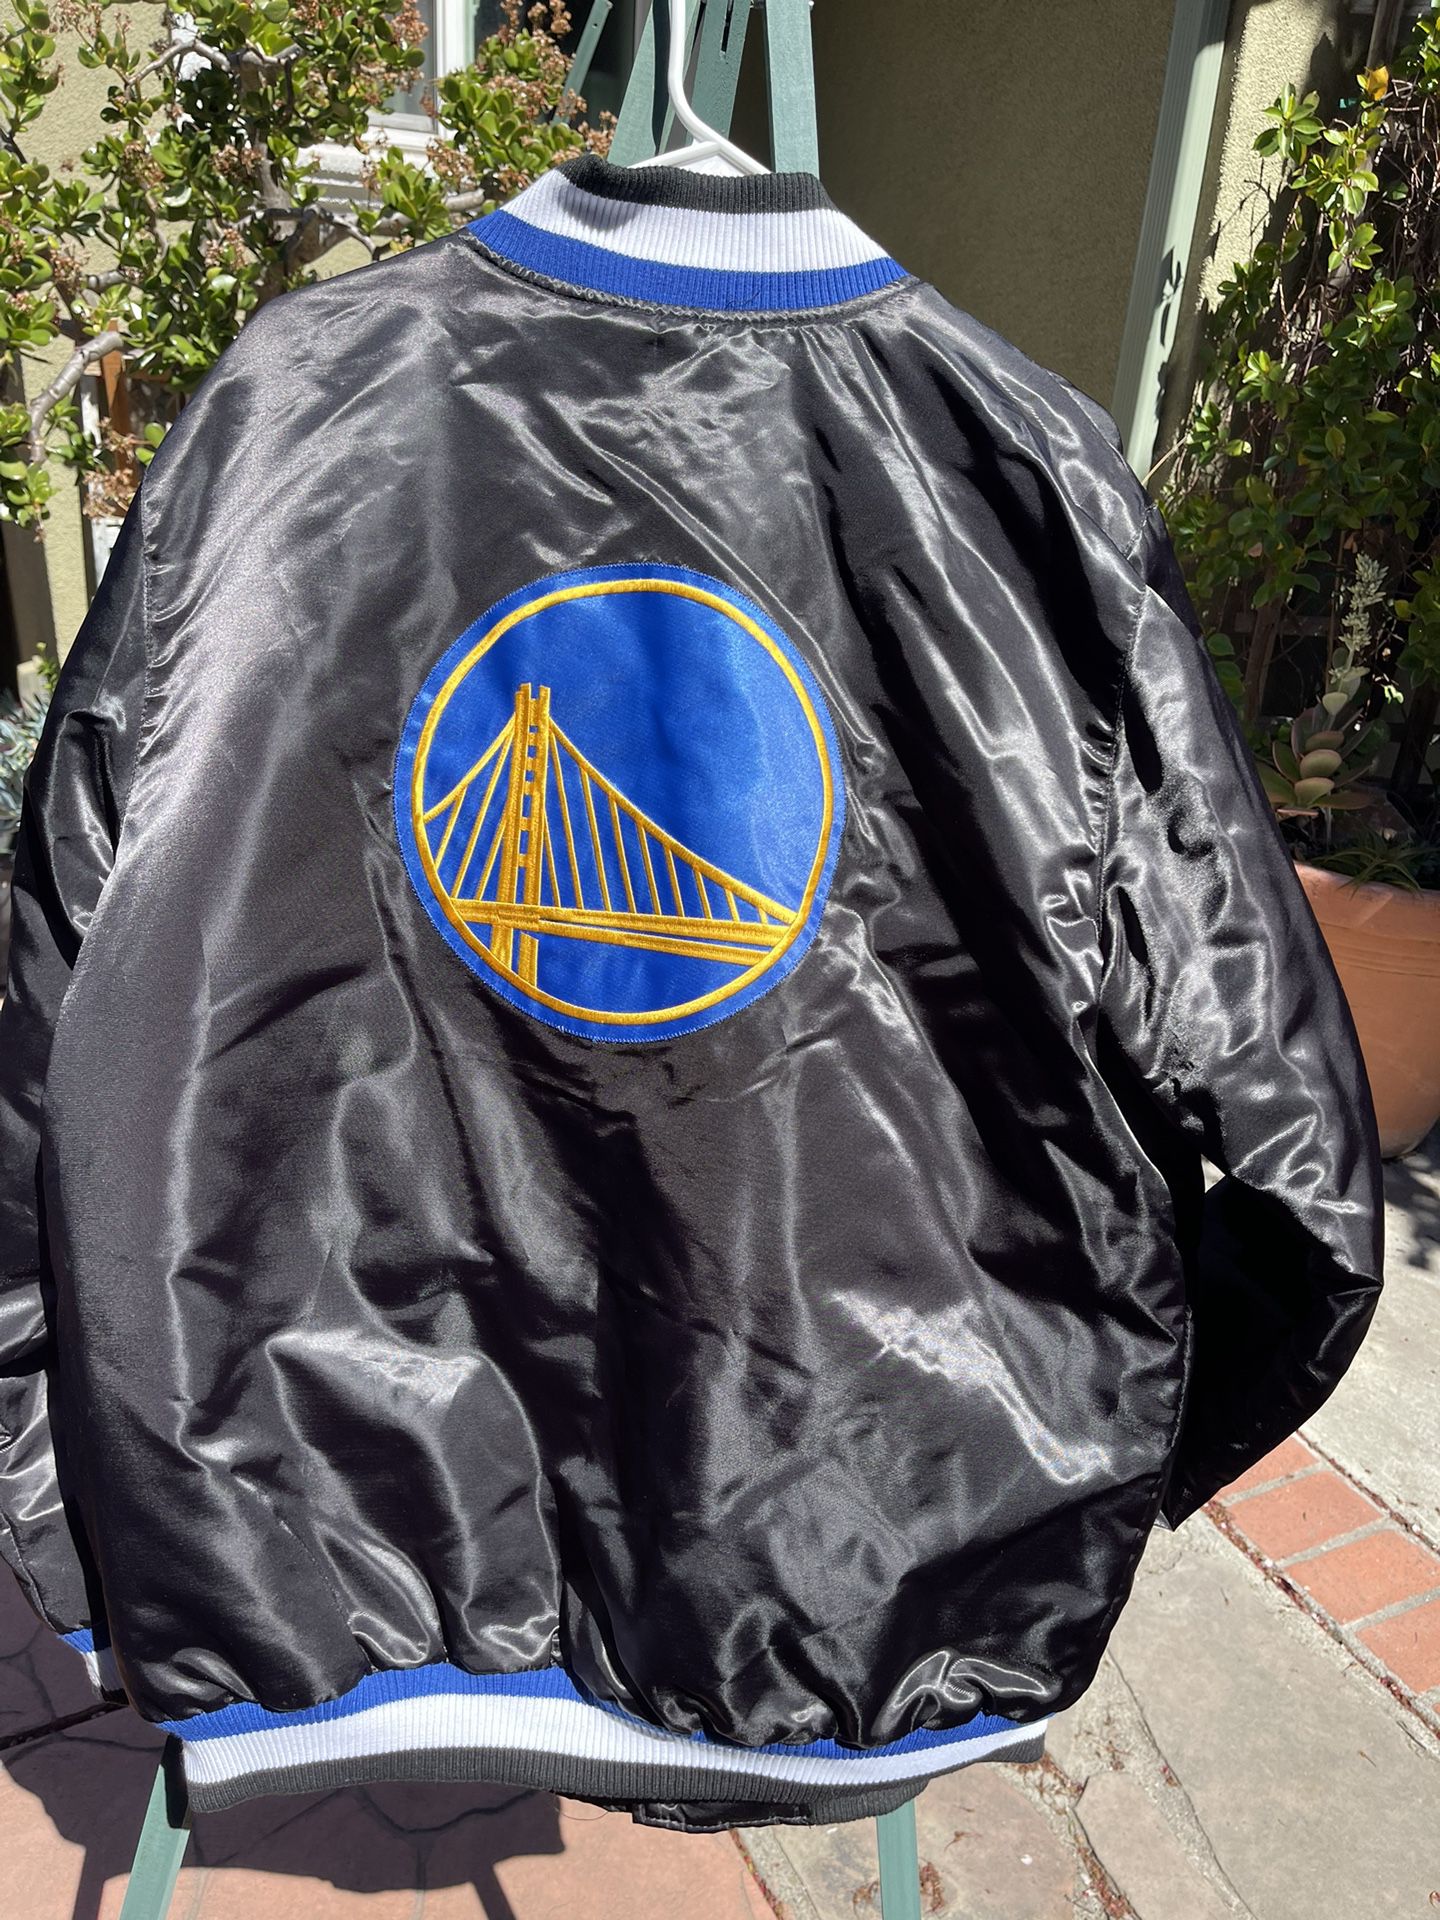 GSW Starter Jacket “The Town” for Sale in South San Francisco, CA - OfferUp